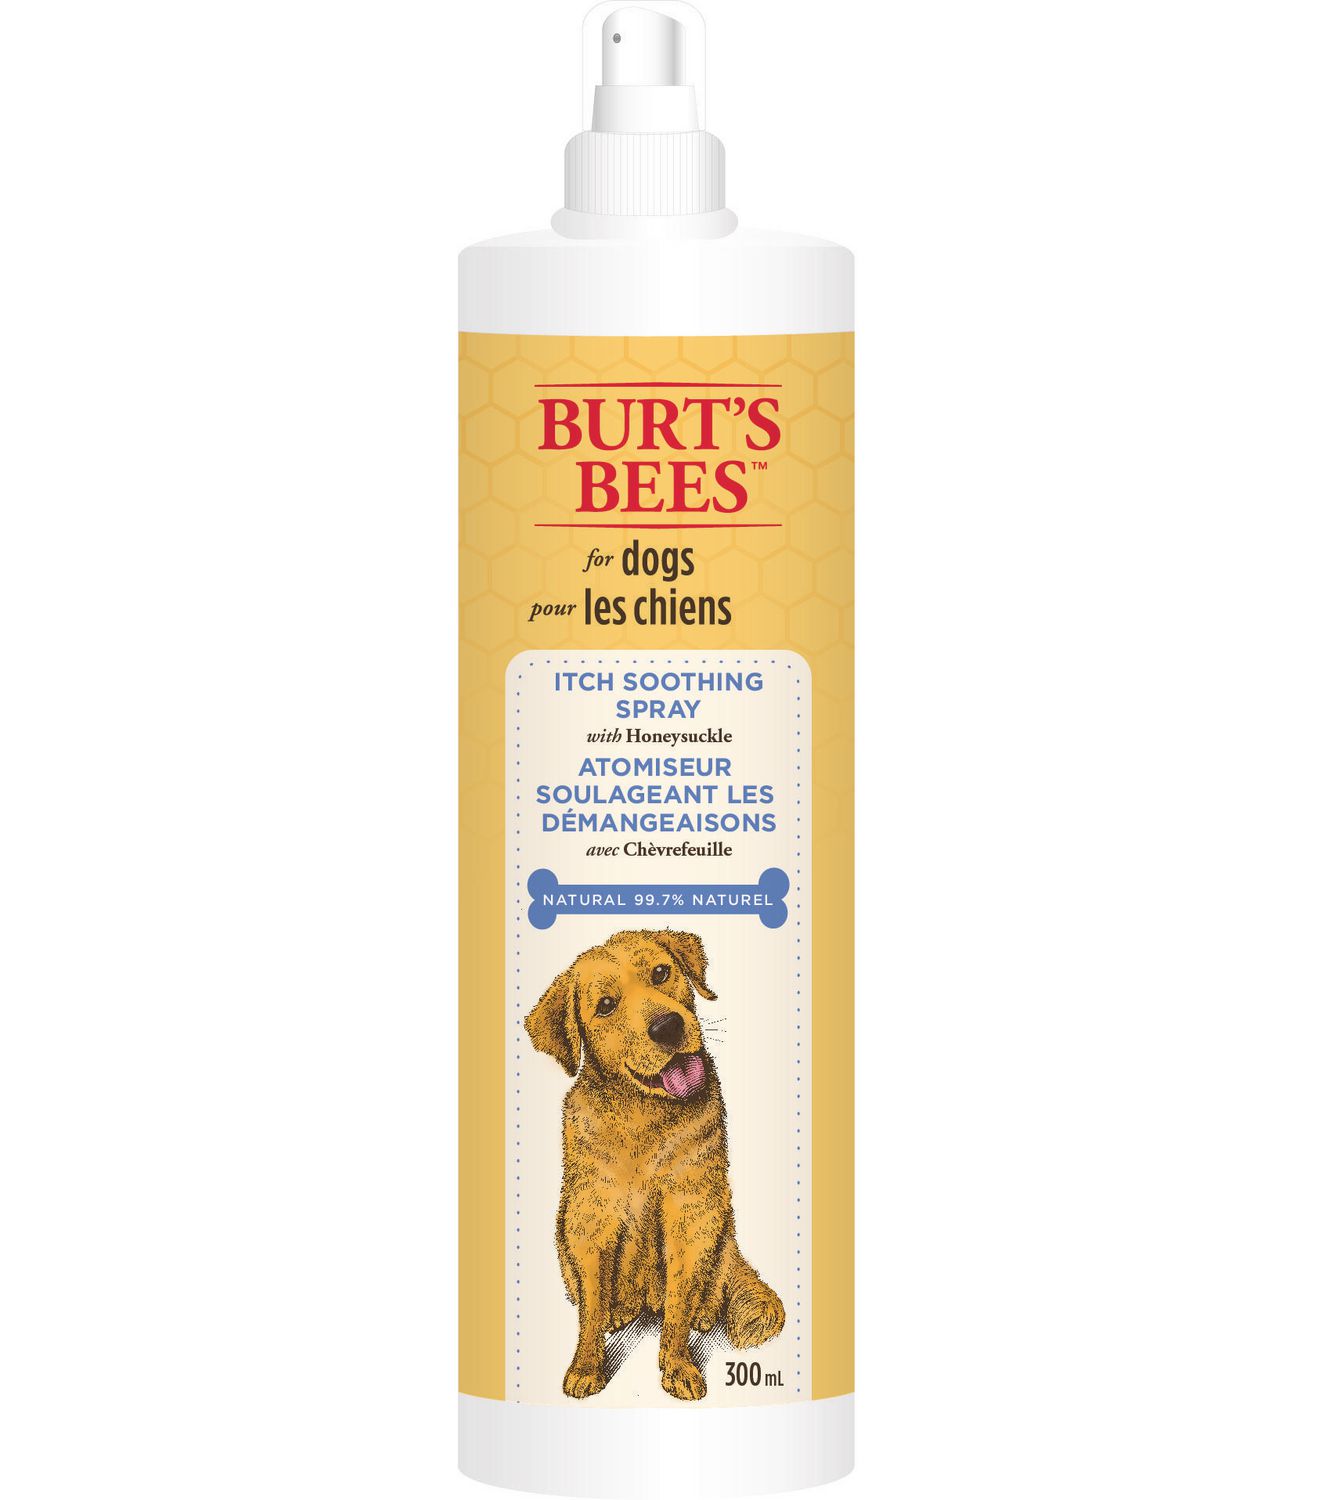 Burt's Bees Itch Soothing Spray with Honeysuckle for Dogs | Walmart Canada